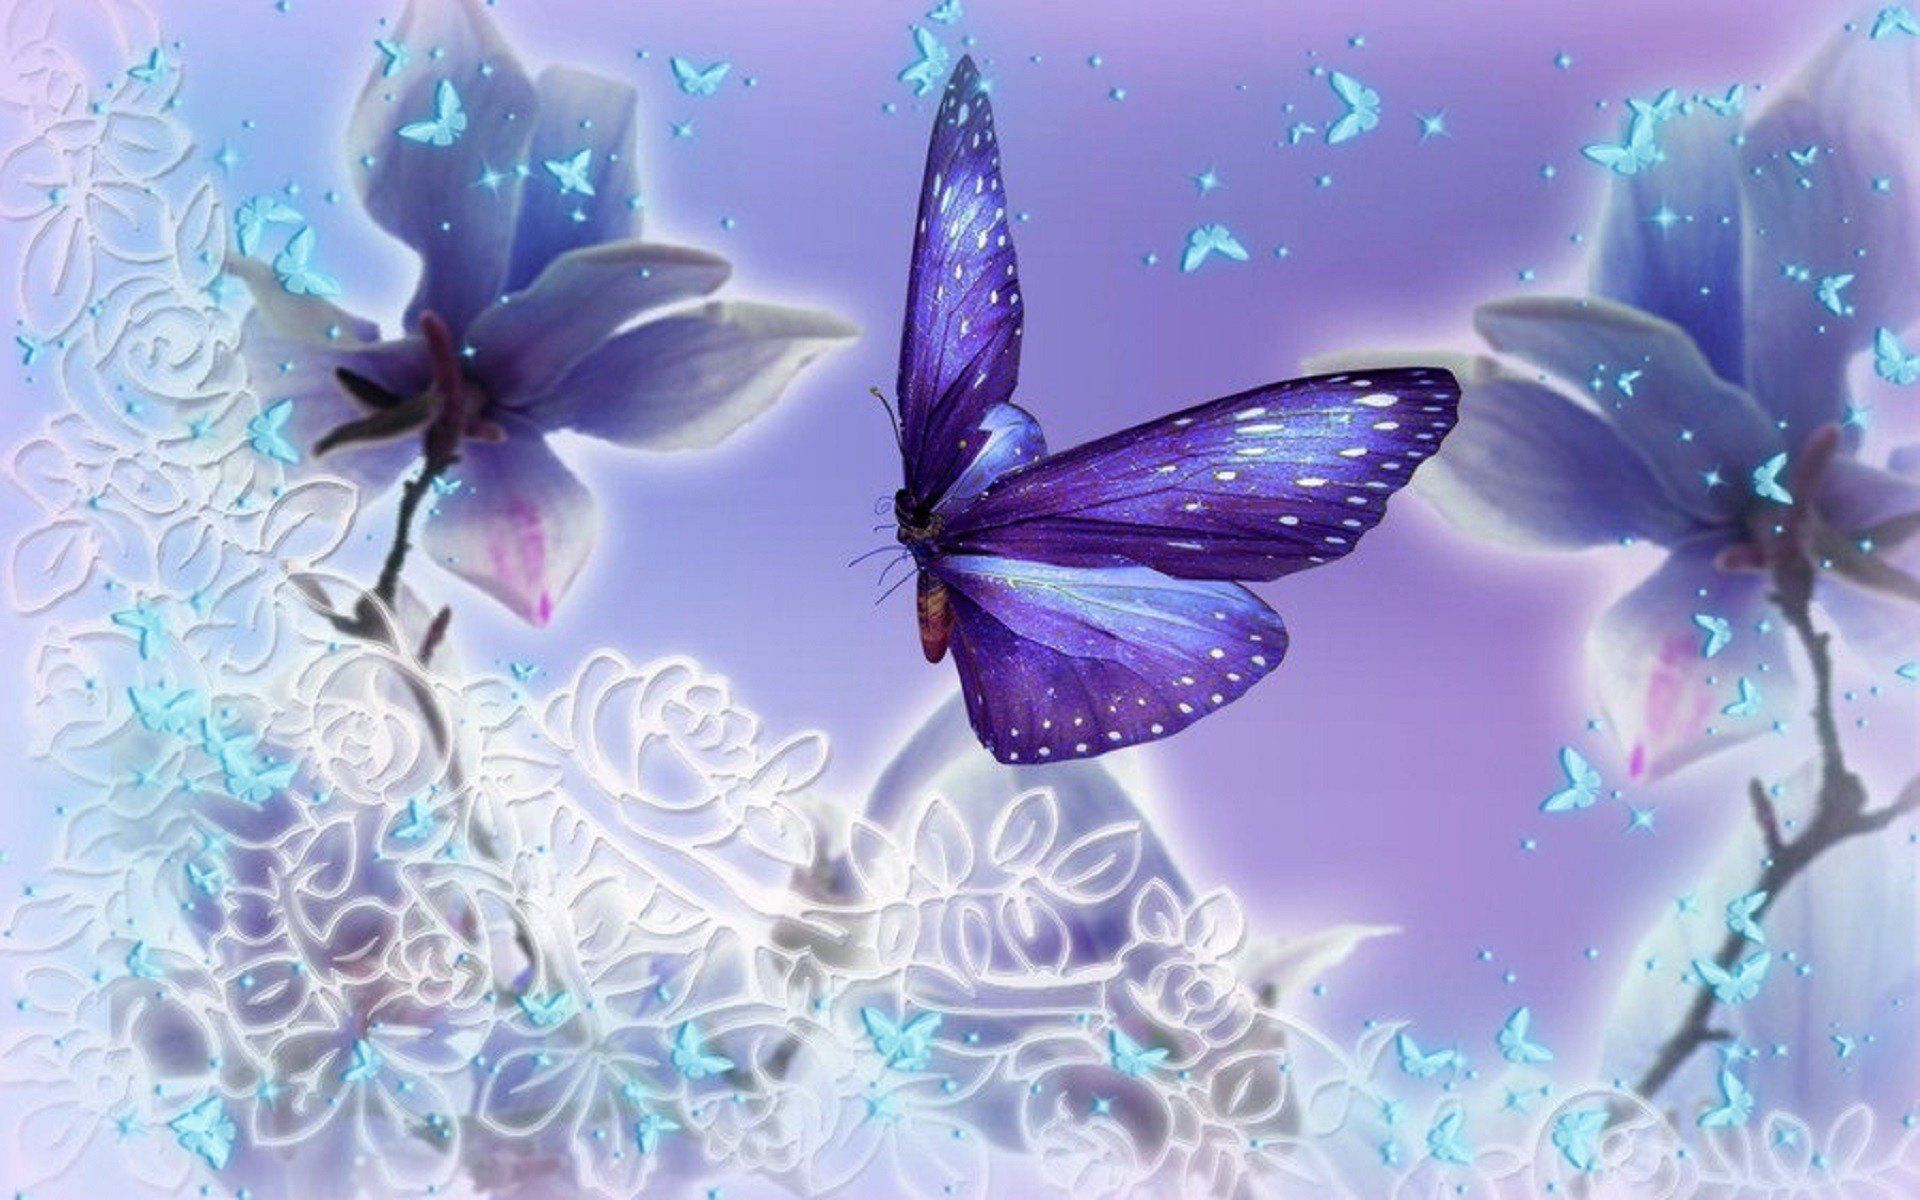 animated butterfly wallpaper for mobile phone